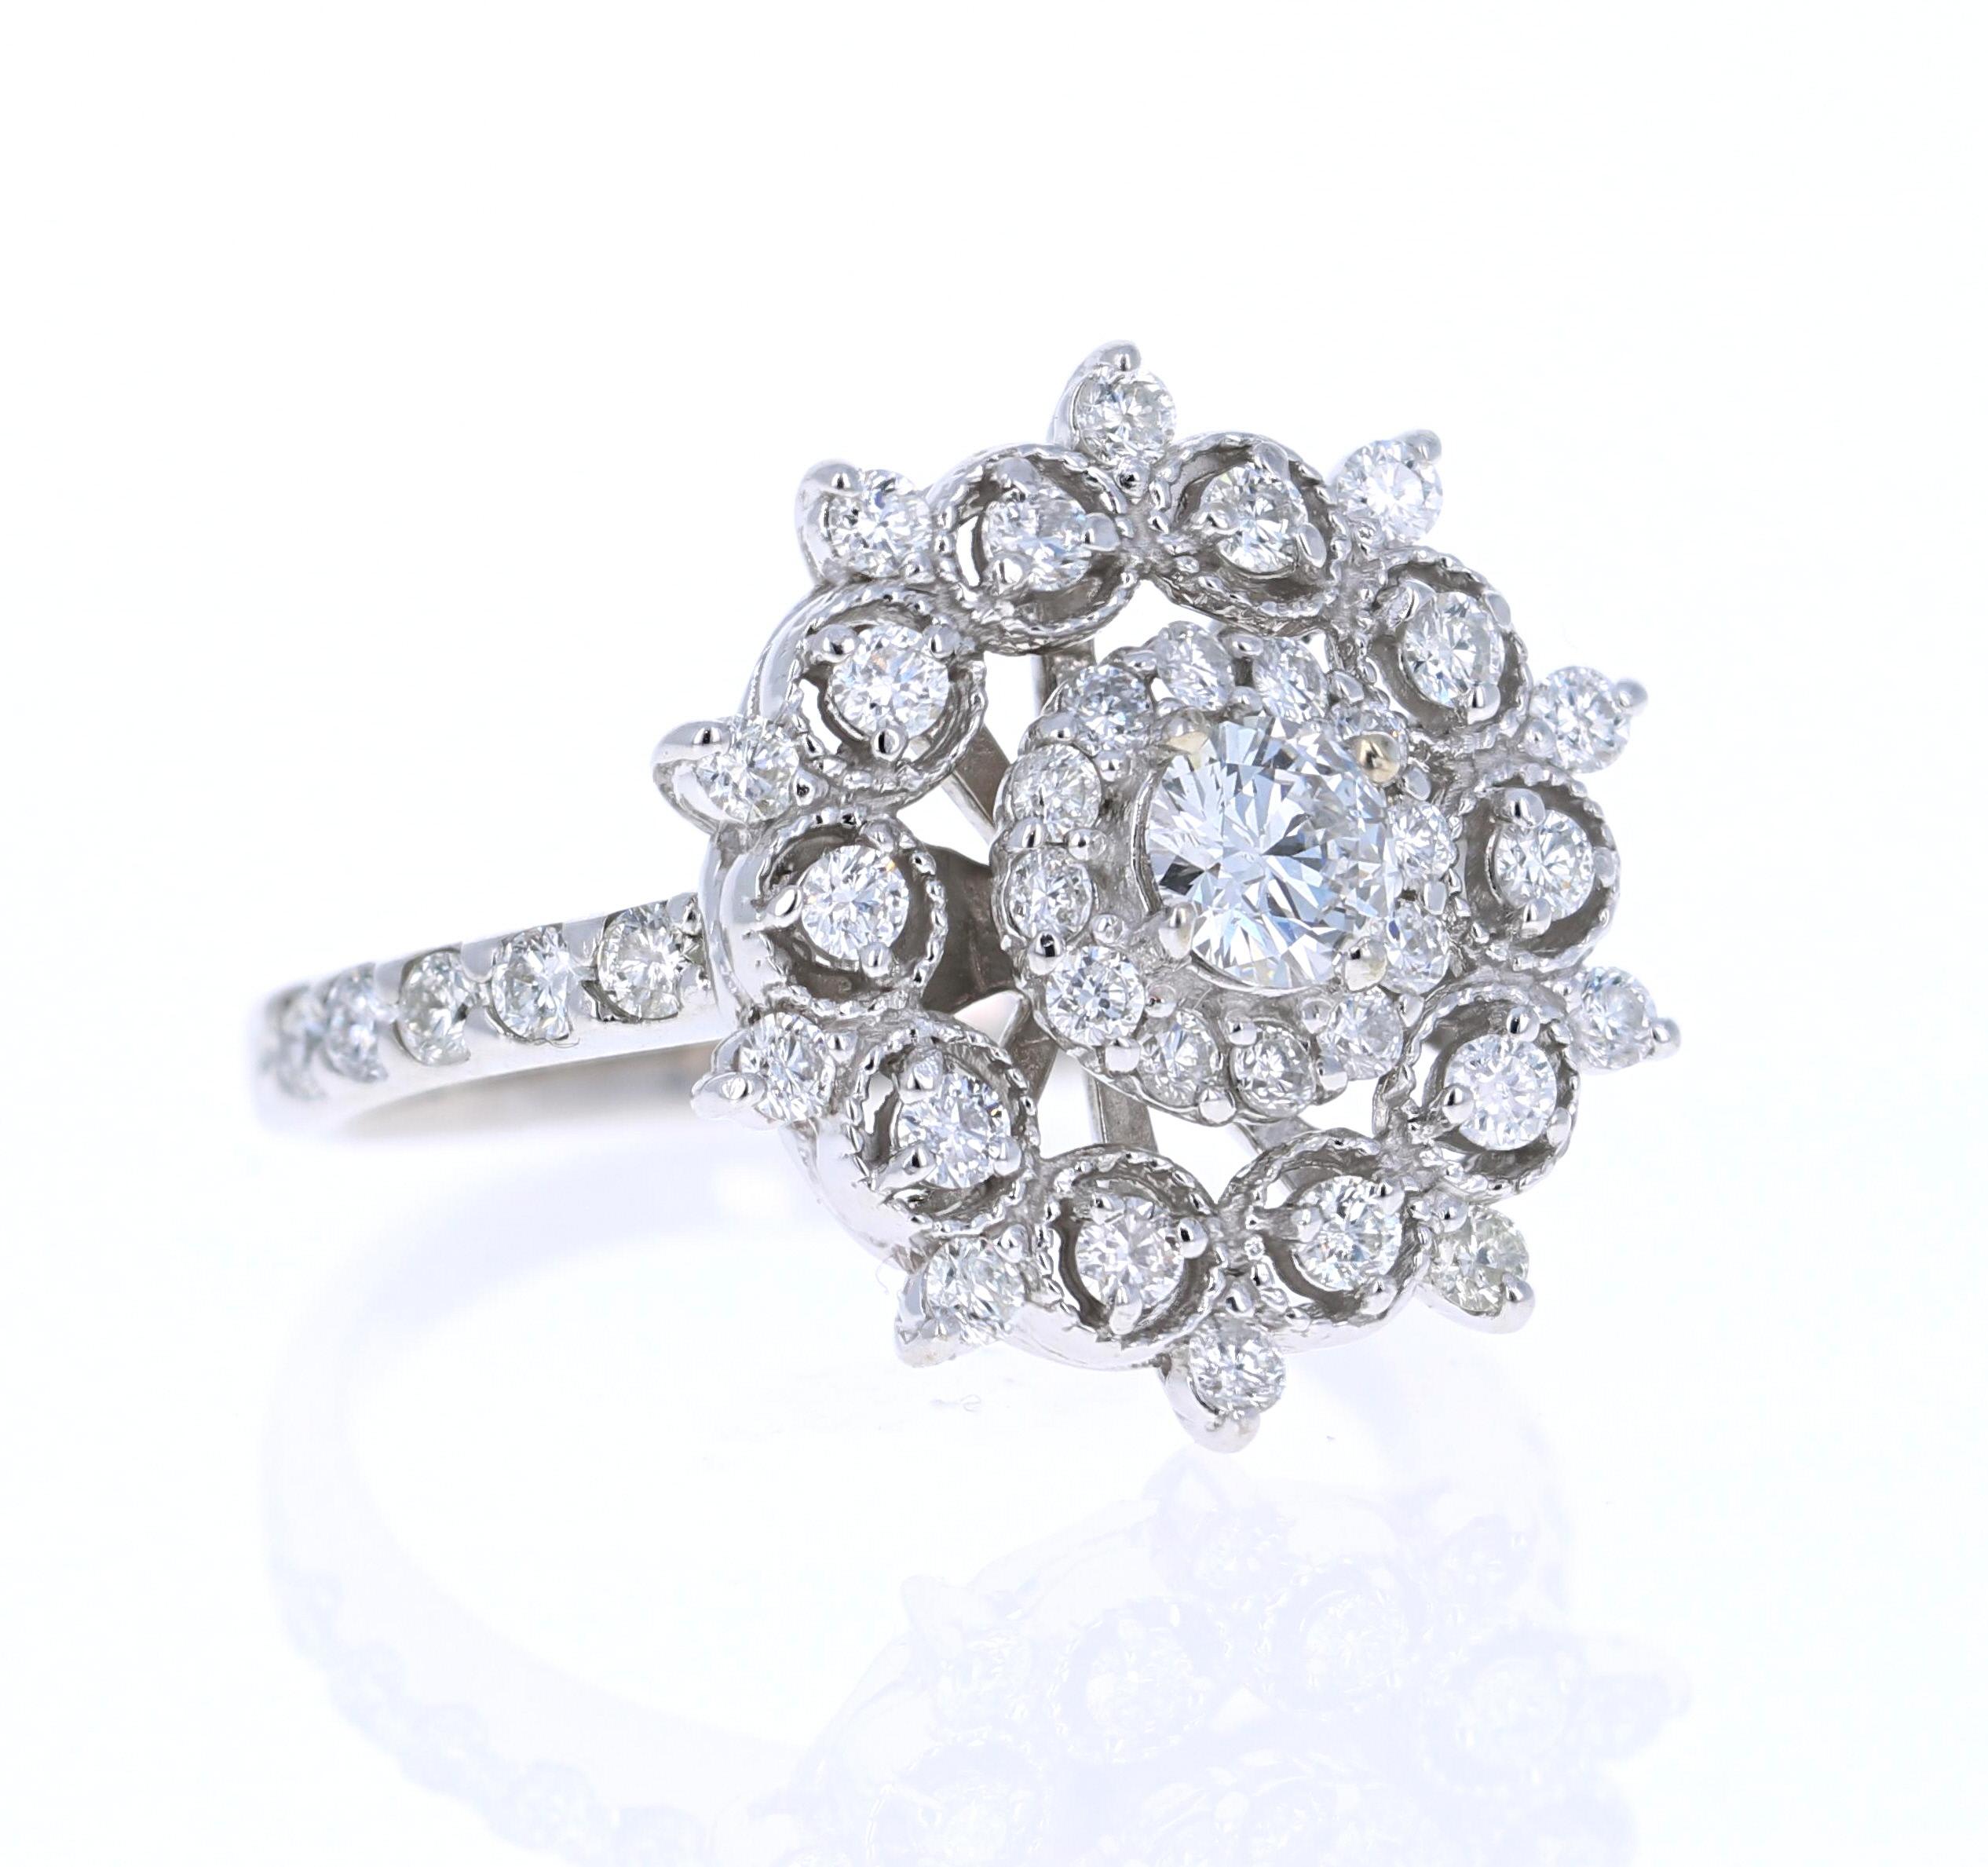 A truly unique designed cocktail ring - a statement piece that bejewels the entire finger!

This beautiful ring has a center diamond round cut diamond that weighs 0.30 carats with a clarity of SI and color of F. It also has 42 round cut diamonds